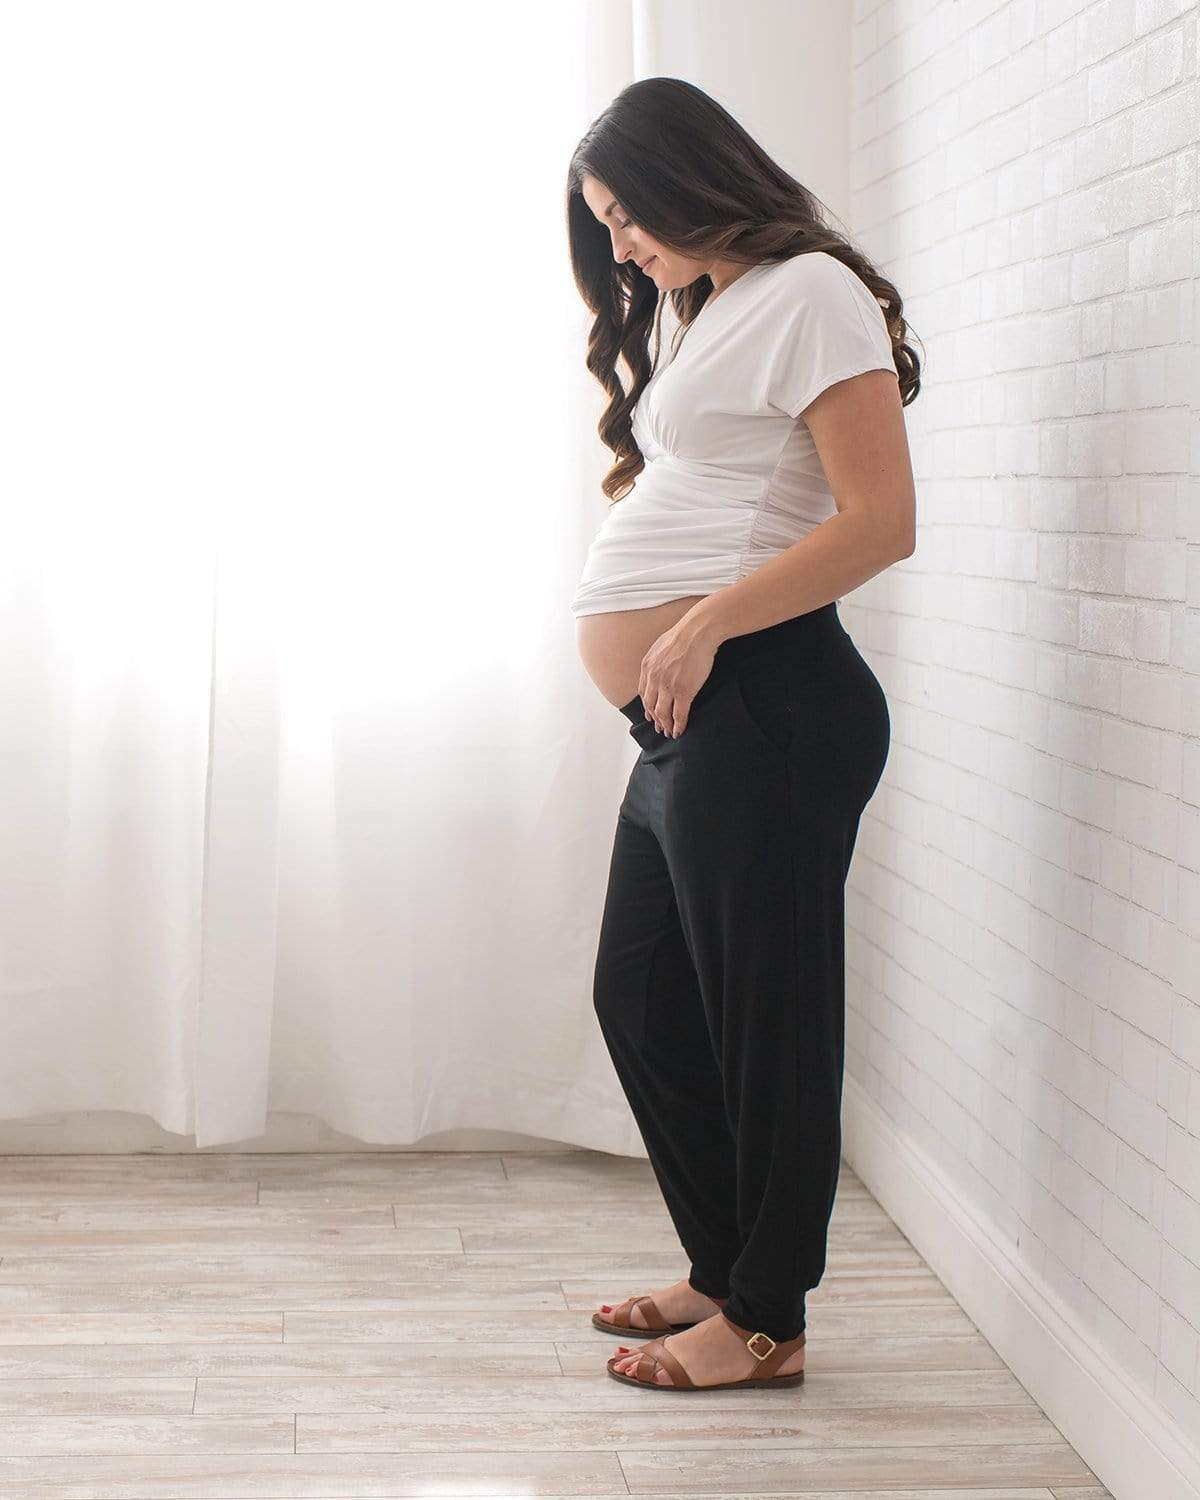 Maternity Yoga Clothes: What to Wear When Pregnant. Nike.com